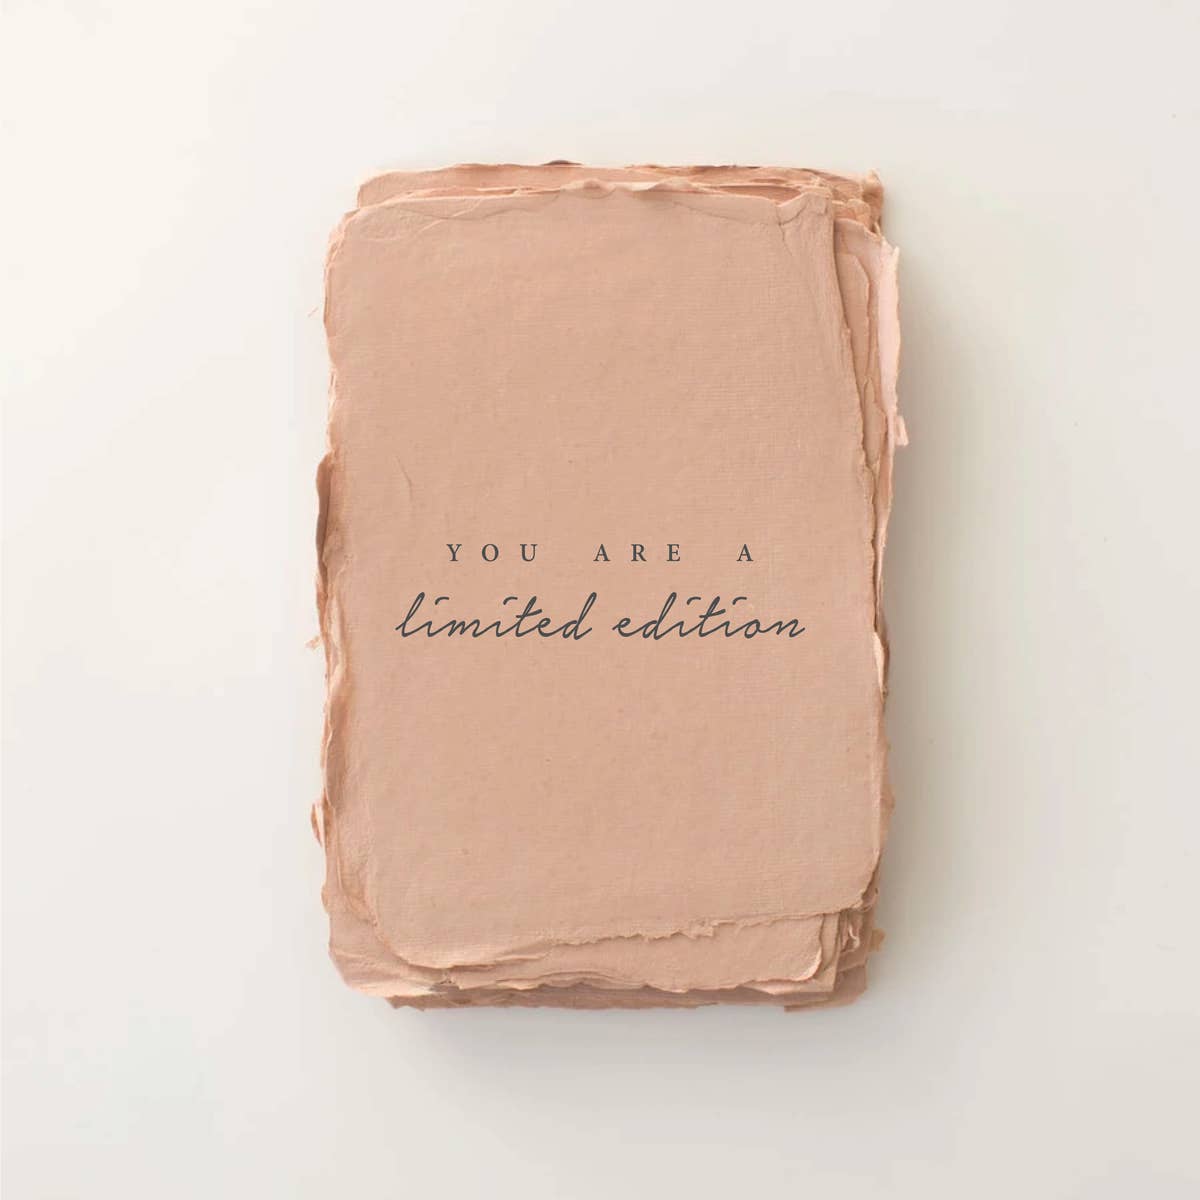 "You are a limited edition" greeting card by Paper Baristas